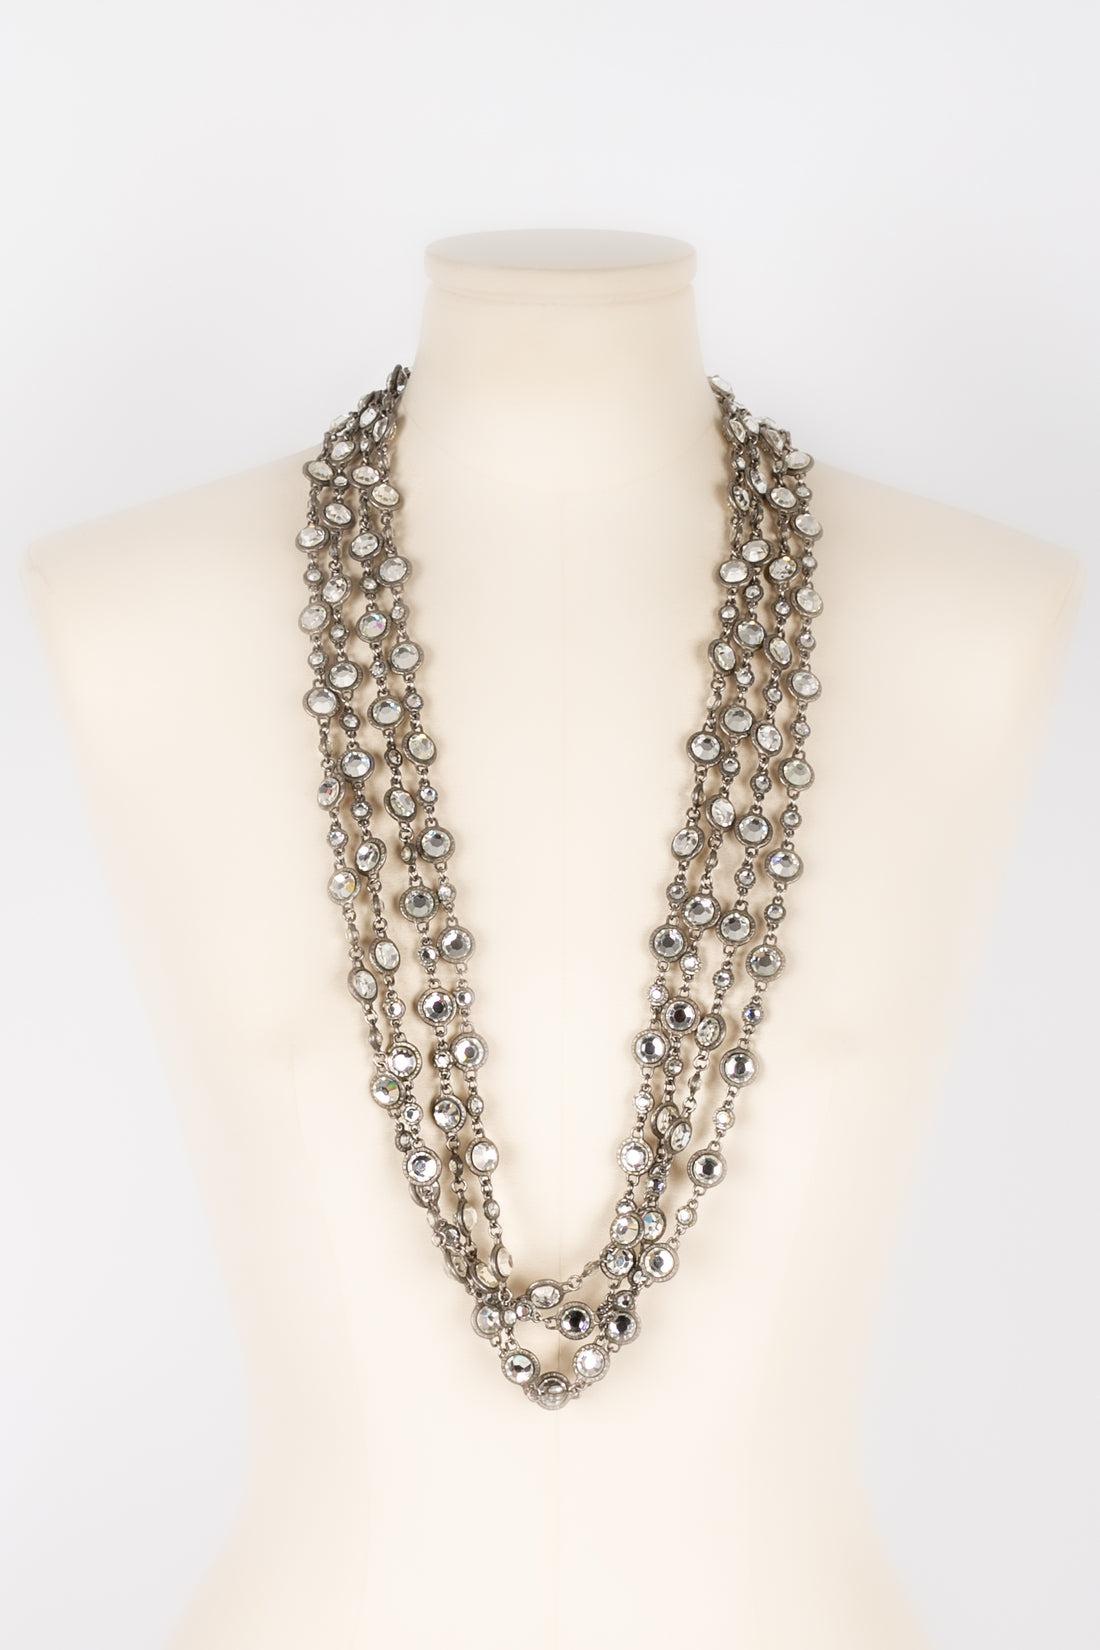 Chanel - (Made in France) Long necklace in silver-plated metal and Swarovski rhinestones. Fall-Winter 1998 Collection.

Additional information:
Condition: Very good condition
Dimensions: Length: from 90 cm to 94 cm
Period: 20th Century

Seller